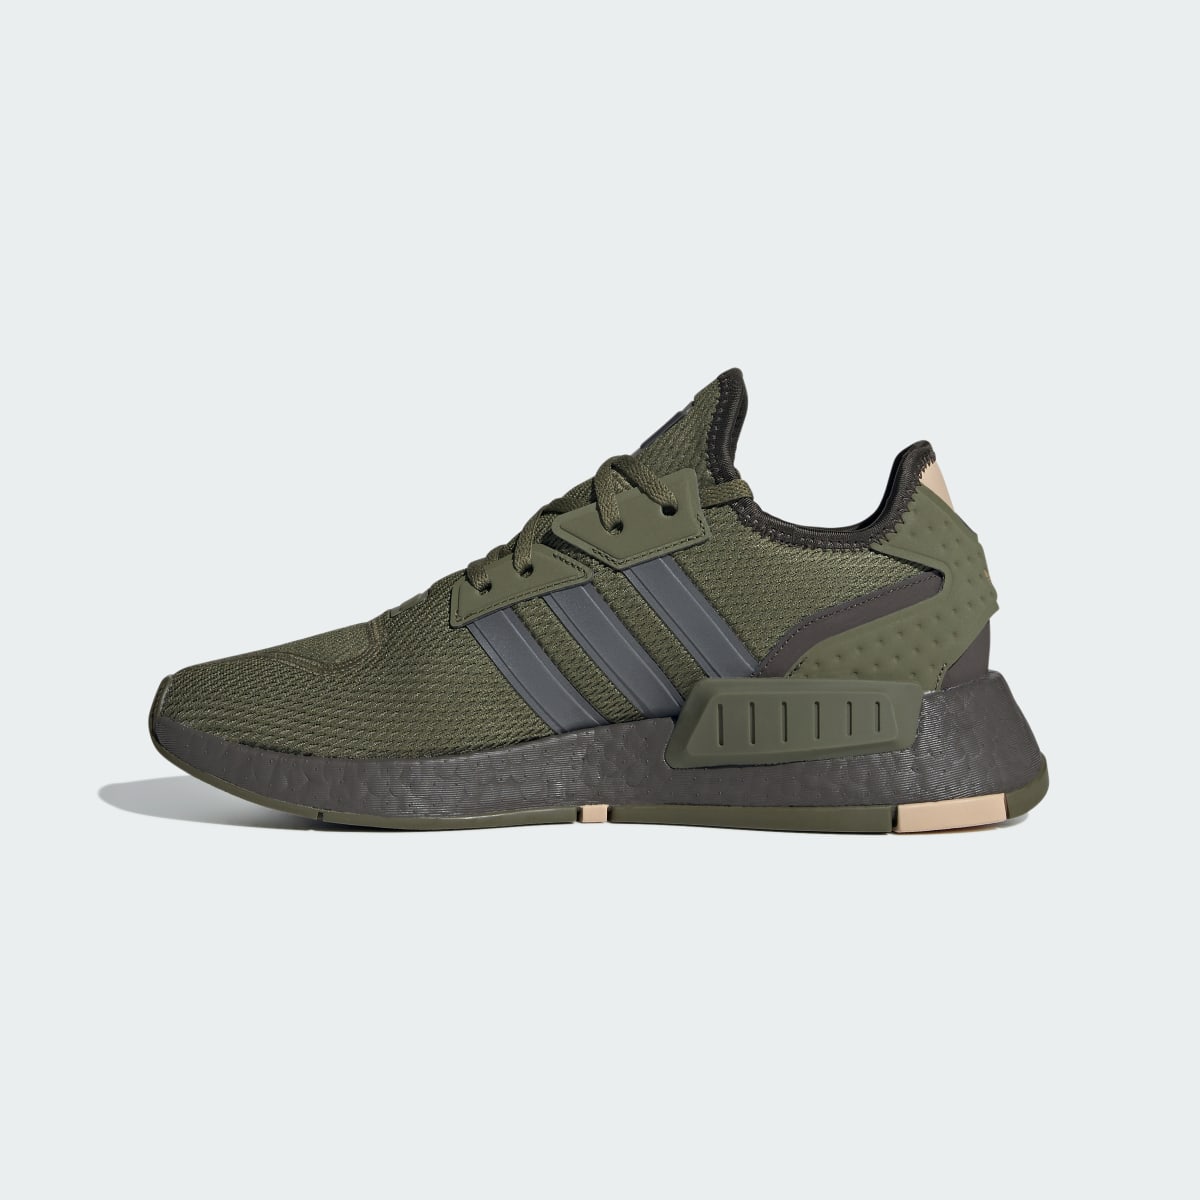 Adidas NMD_G1 Shoes. 9